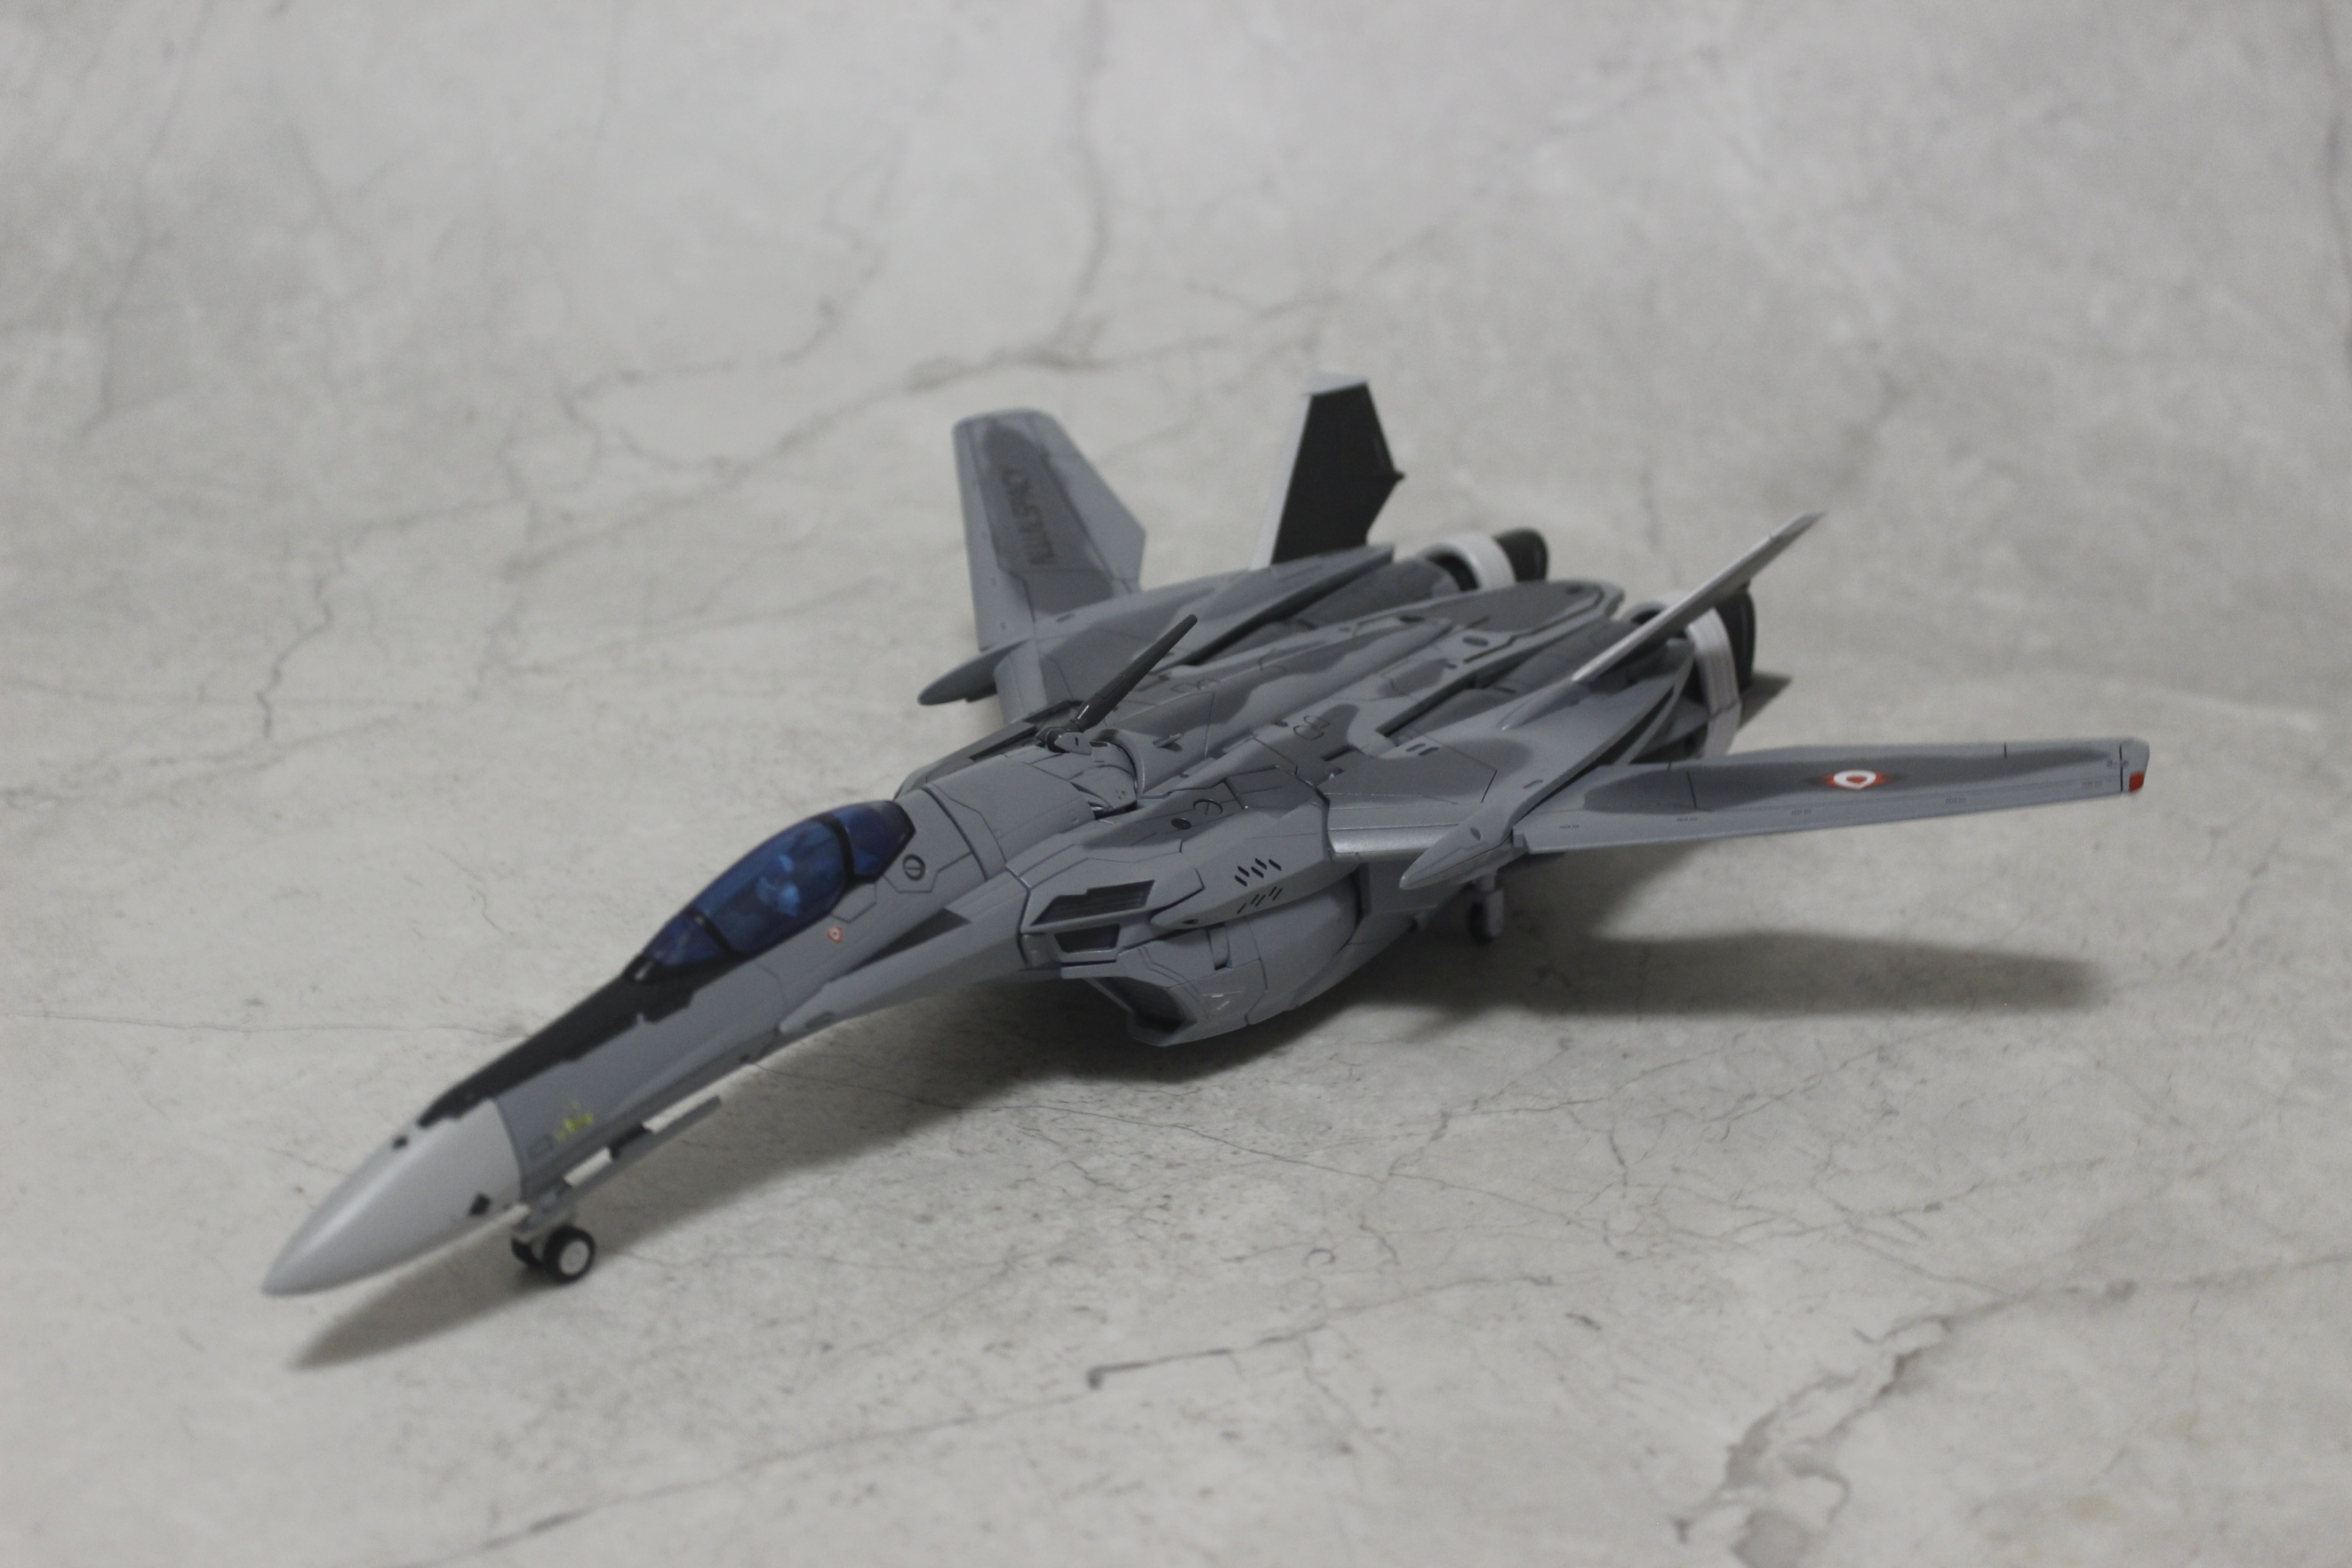 All my painted armored Valkyries - The Workshop! - Macross World Forums